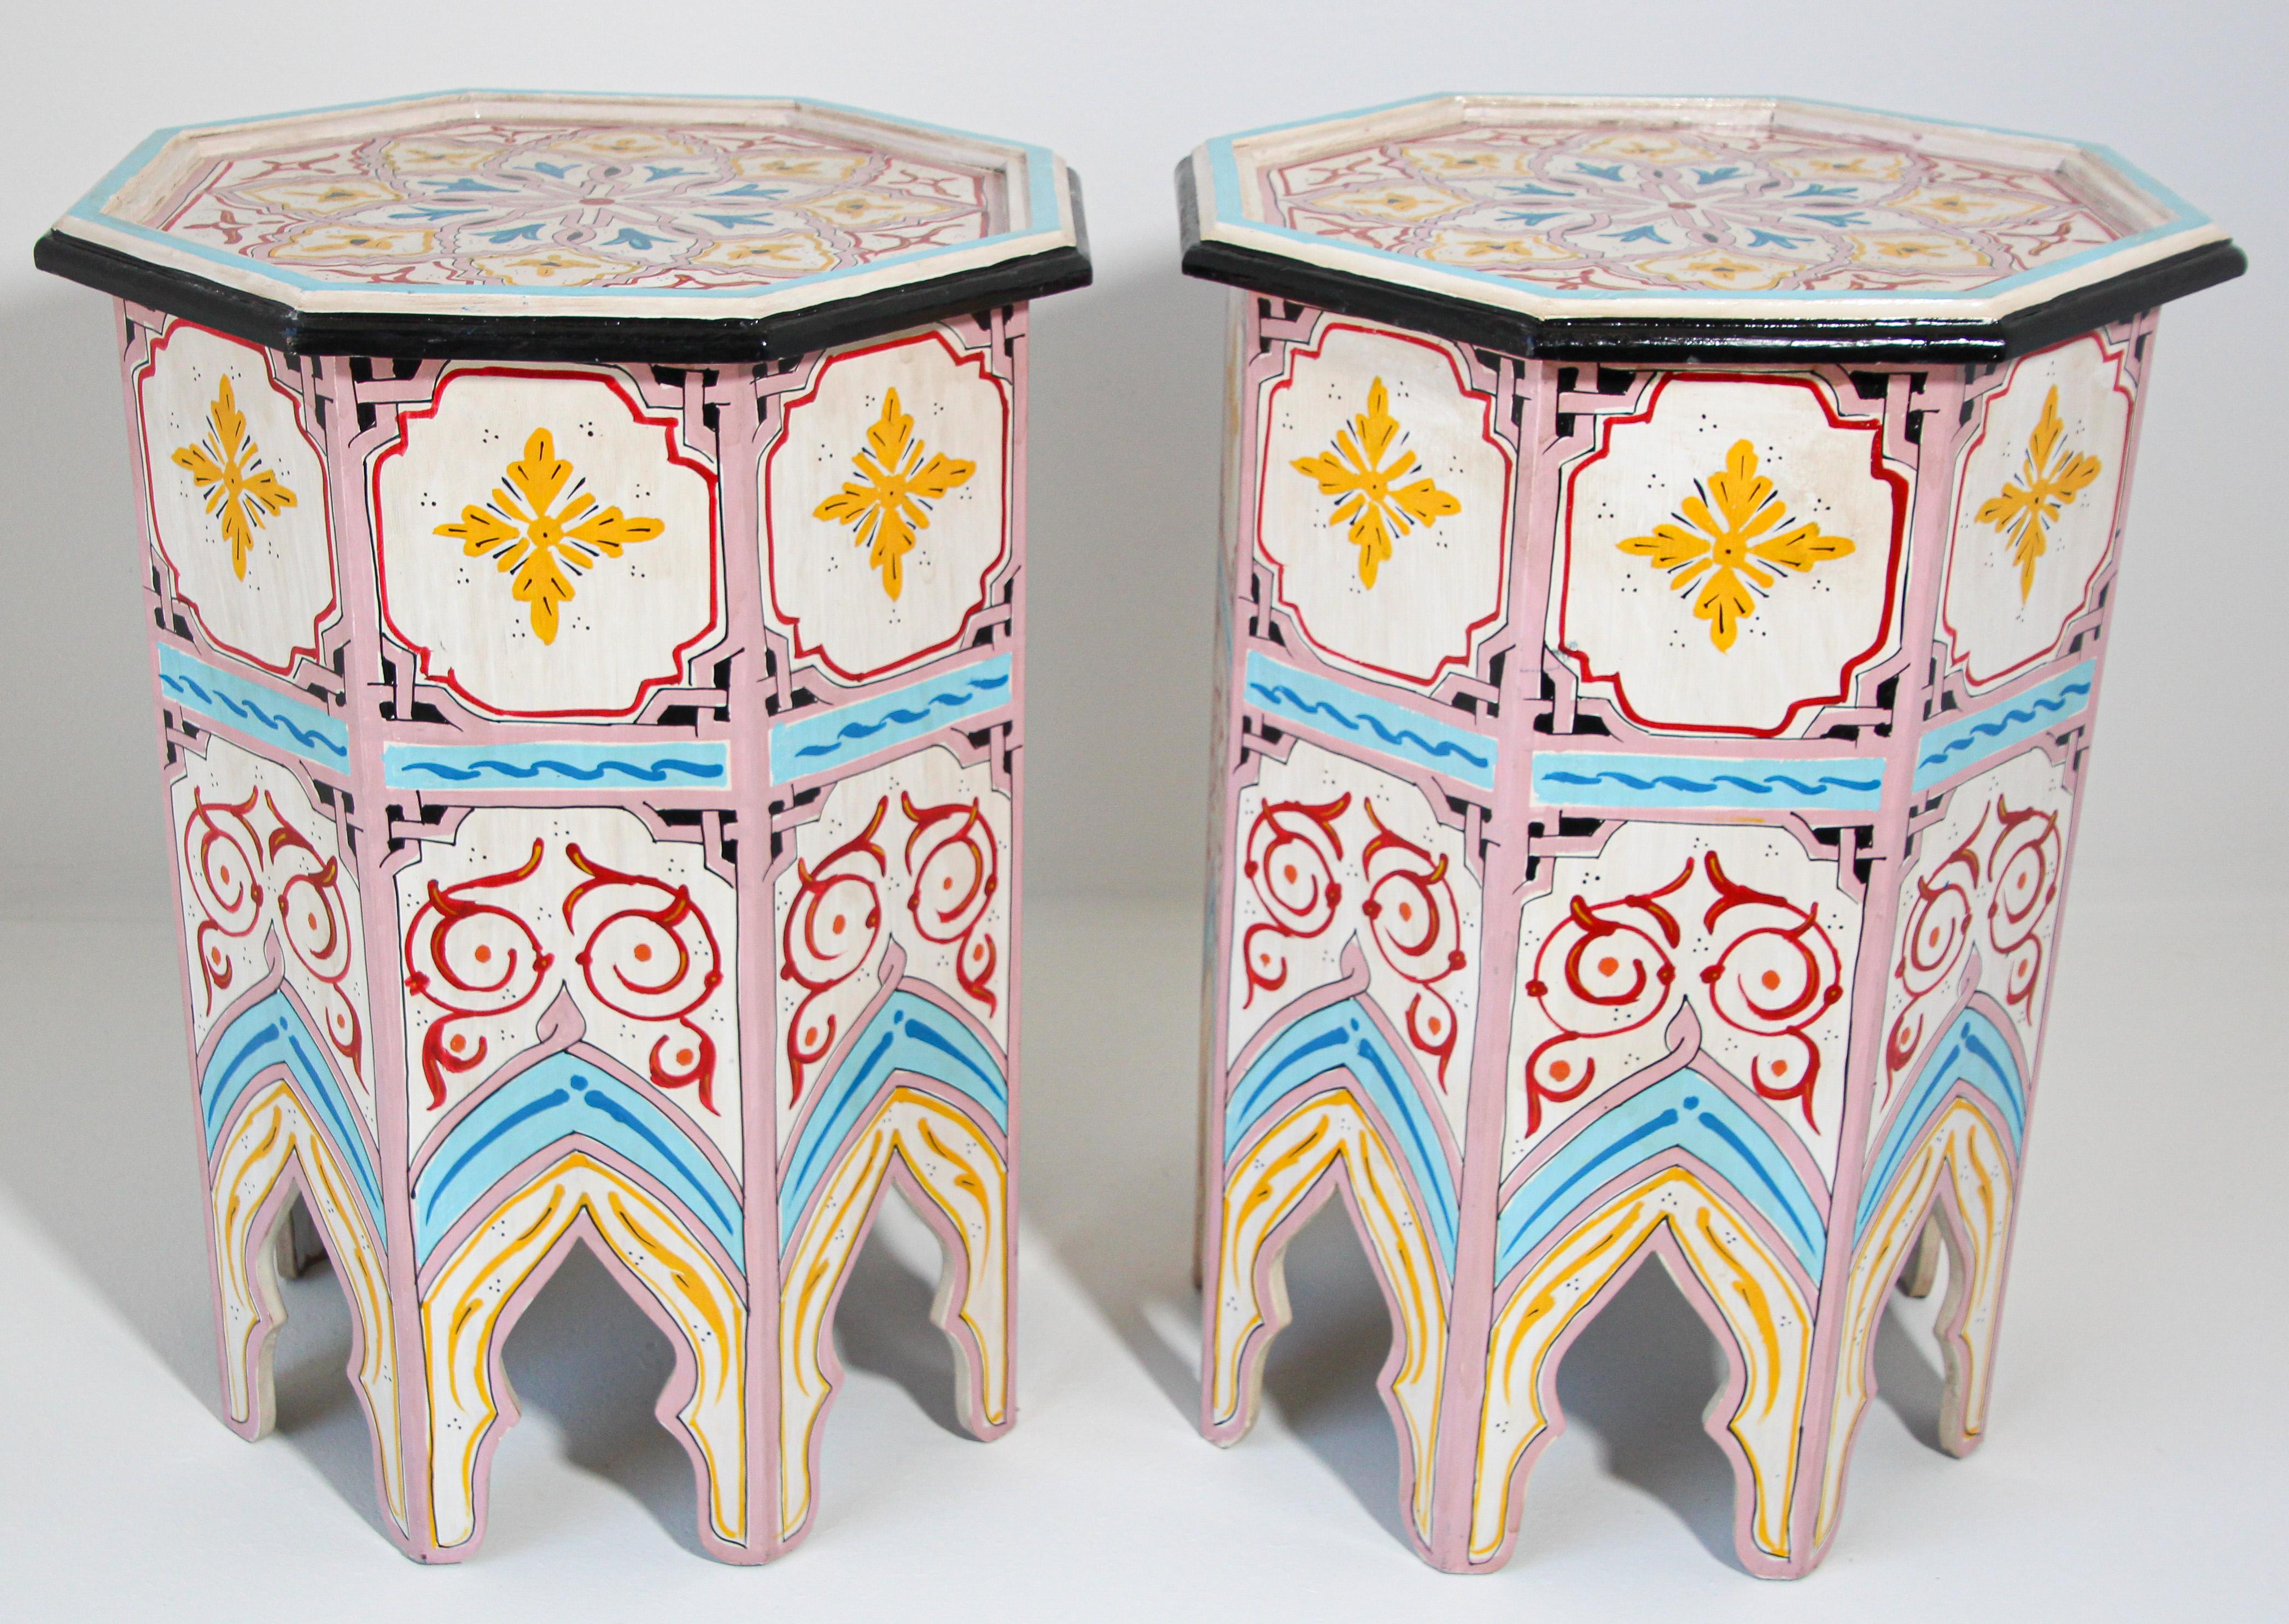 Pair of Moroccan handcrafted and ivory color hand painted tabourets or side tables.
Octagonal shape pedestal tables with Moorish arches.
Very decorative fine artwork in octagonal shape base.
You can use them as nightstand, stools, or side